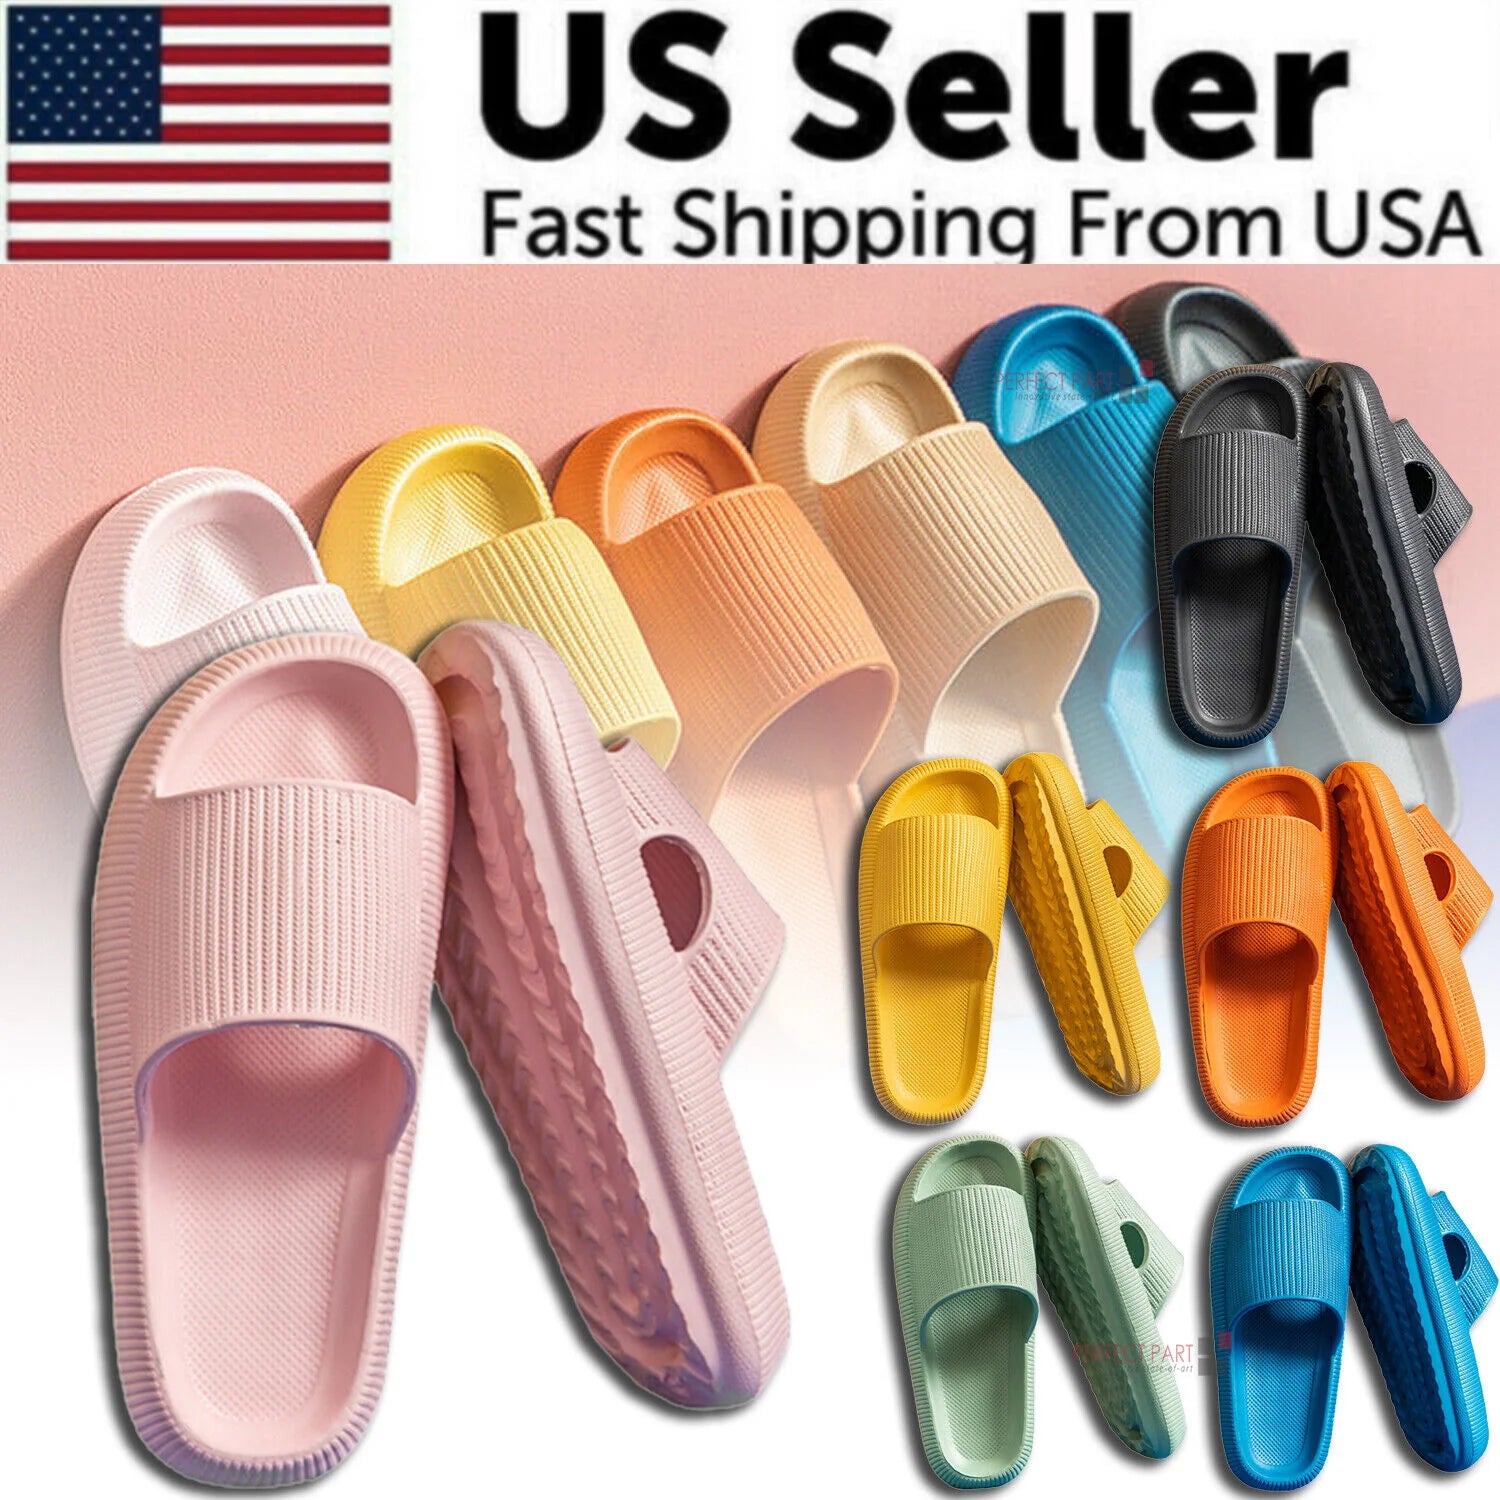 Cozy Pillow Slides Anti-Slip Sandals Ultra Soft Slippers Cloud Home Outdoor Shoe